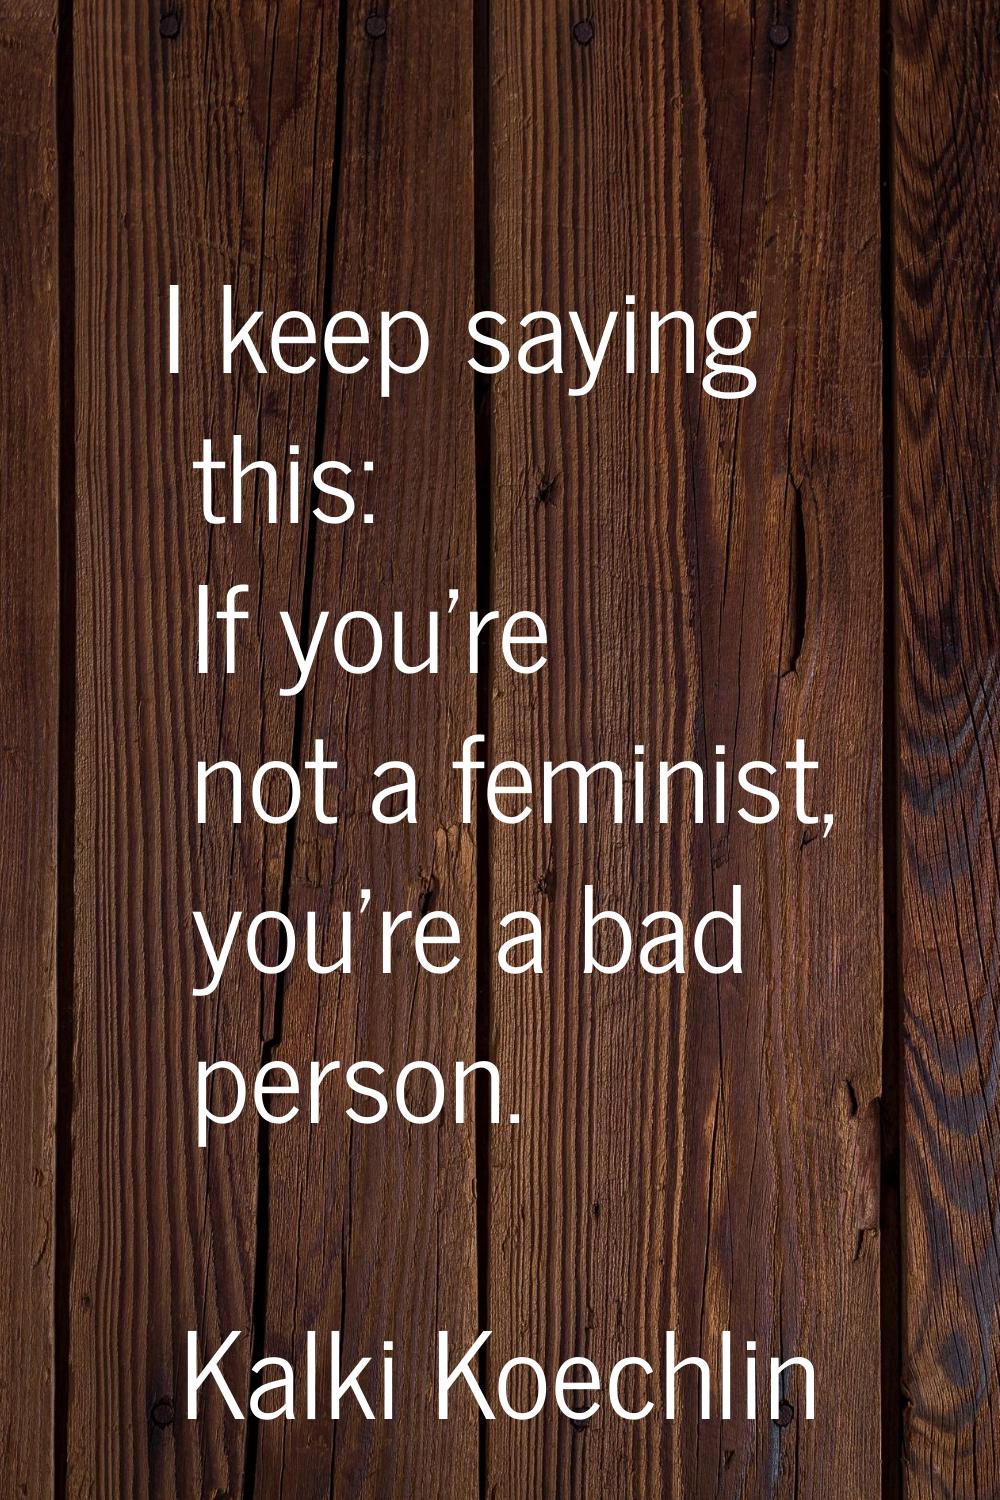 I keep saying this: If you're not a feminist, you're a bad person.